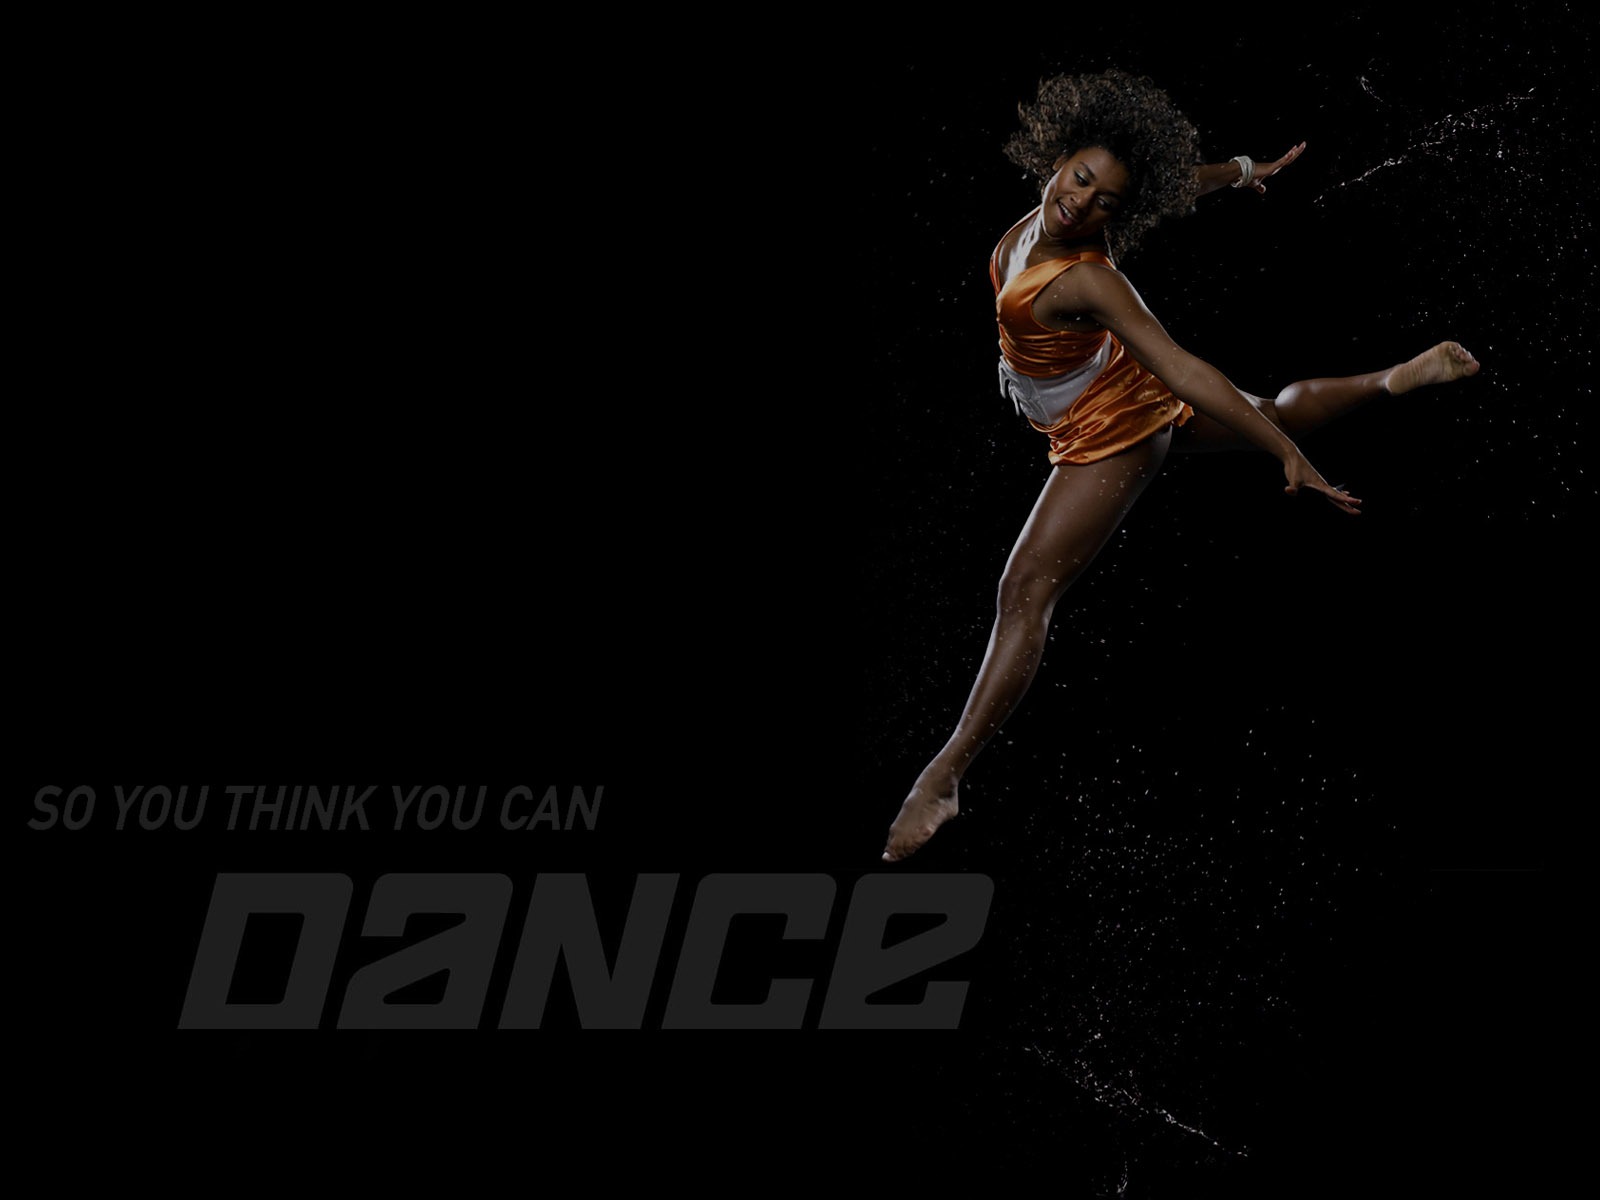 So You Think You Can Dance 舞林争霸 壁纸(二)7 - 1600x1200